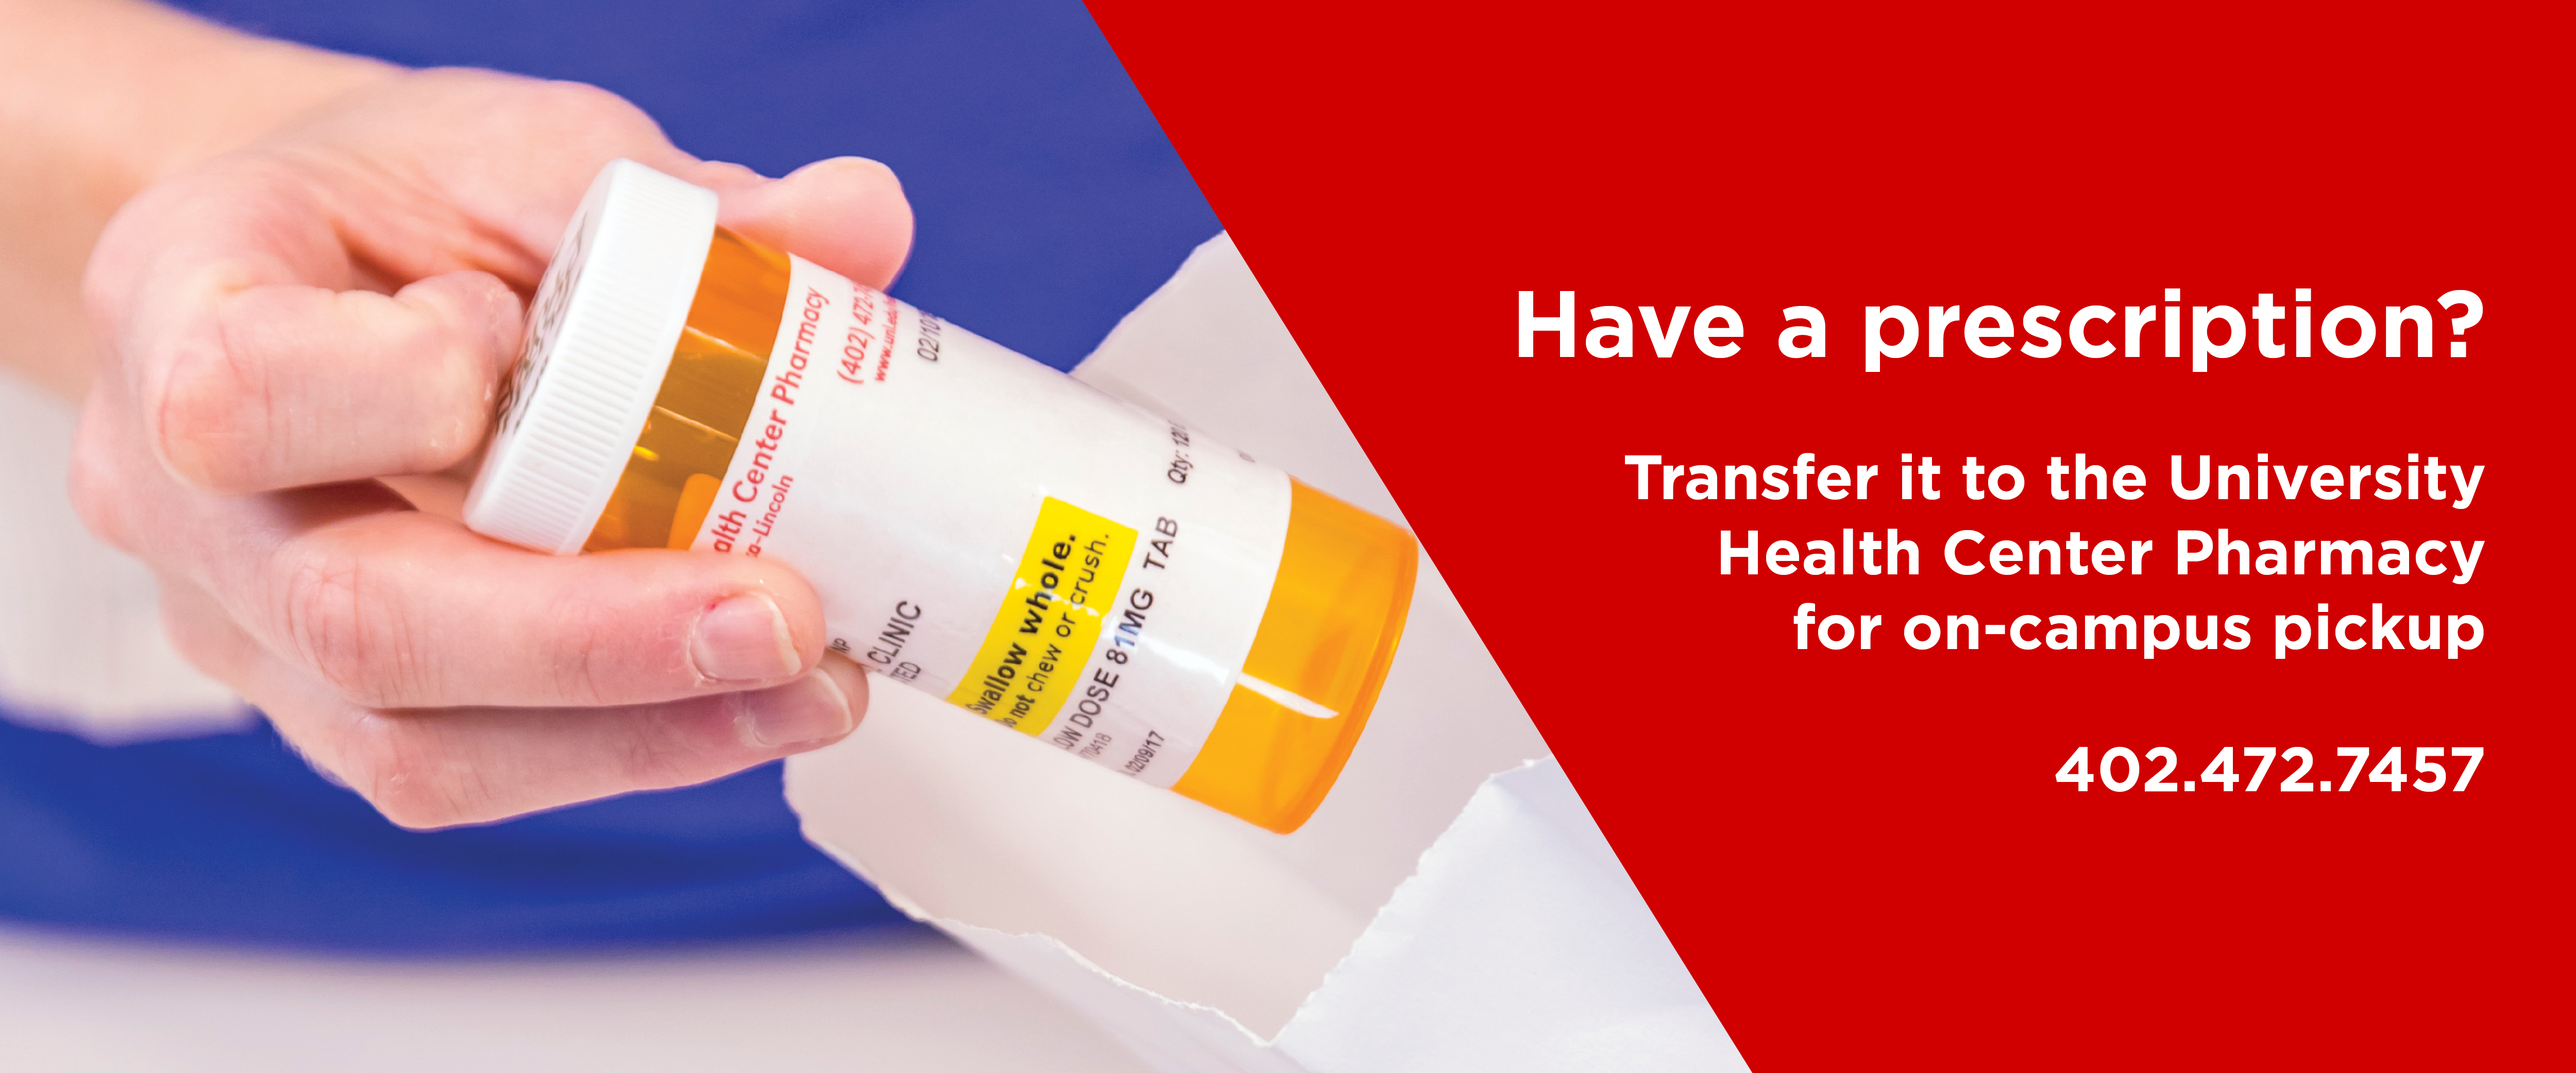 Transfer your prescription to the University Health Center's Pharmacy for an on-campus pick-up.